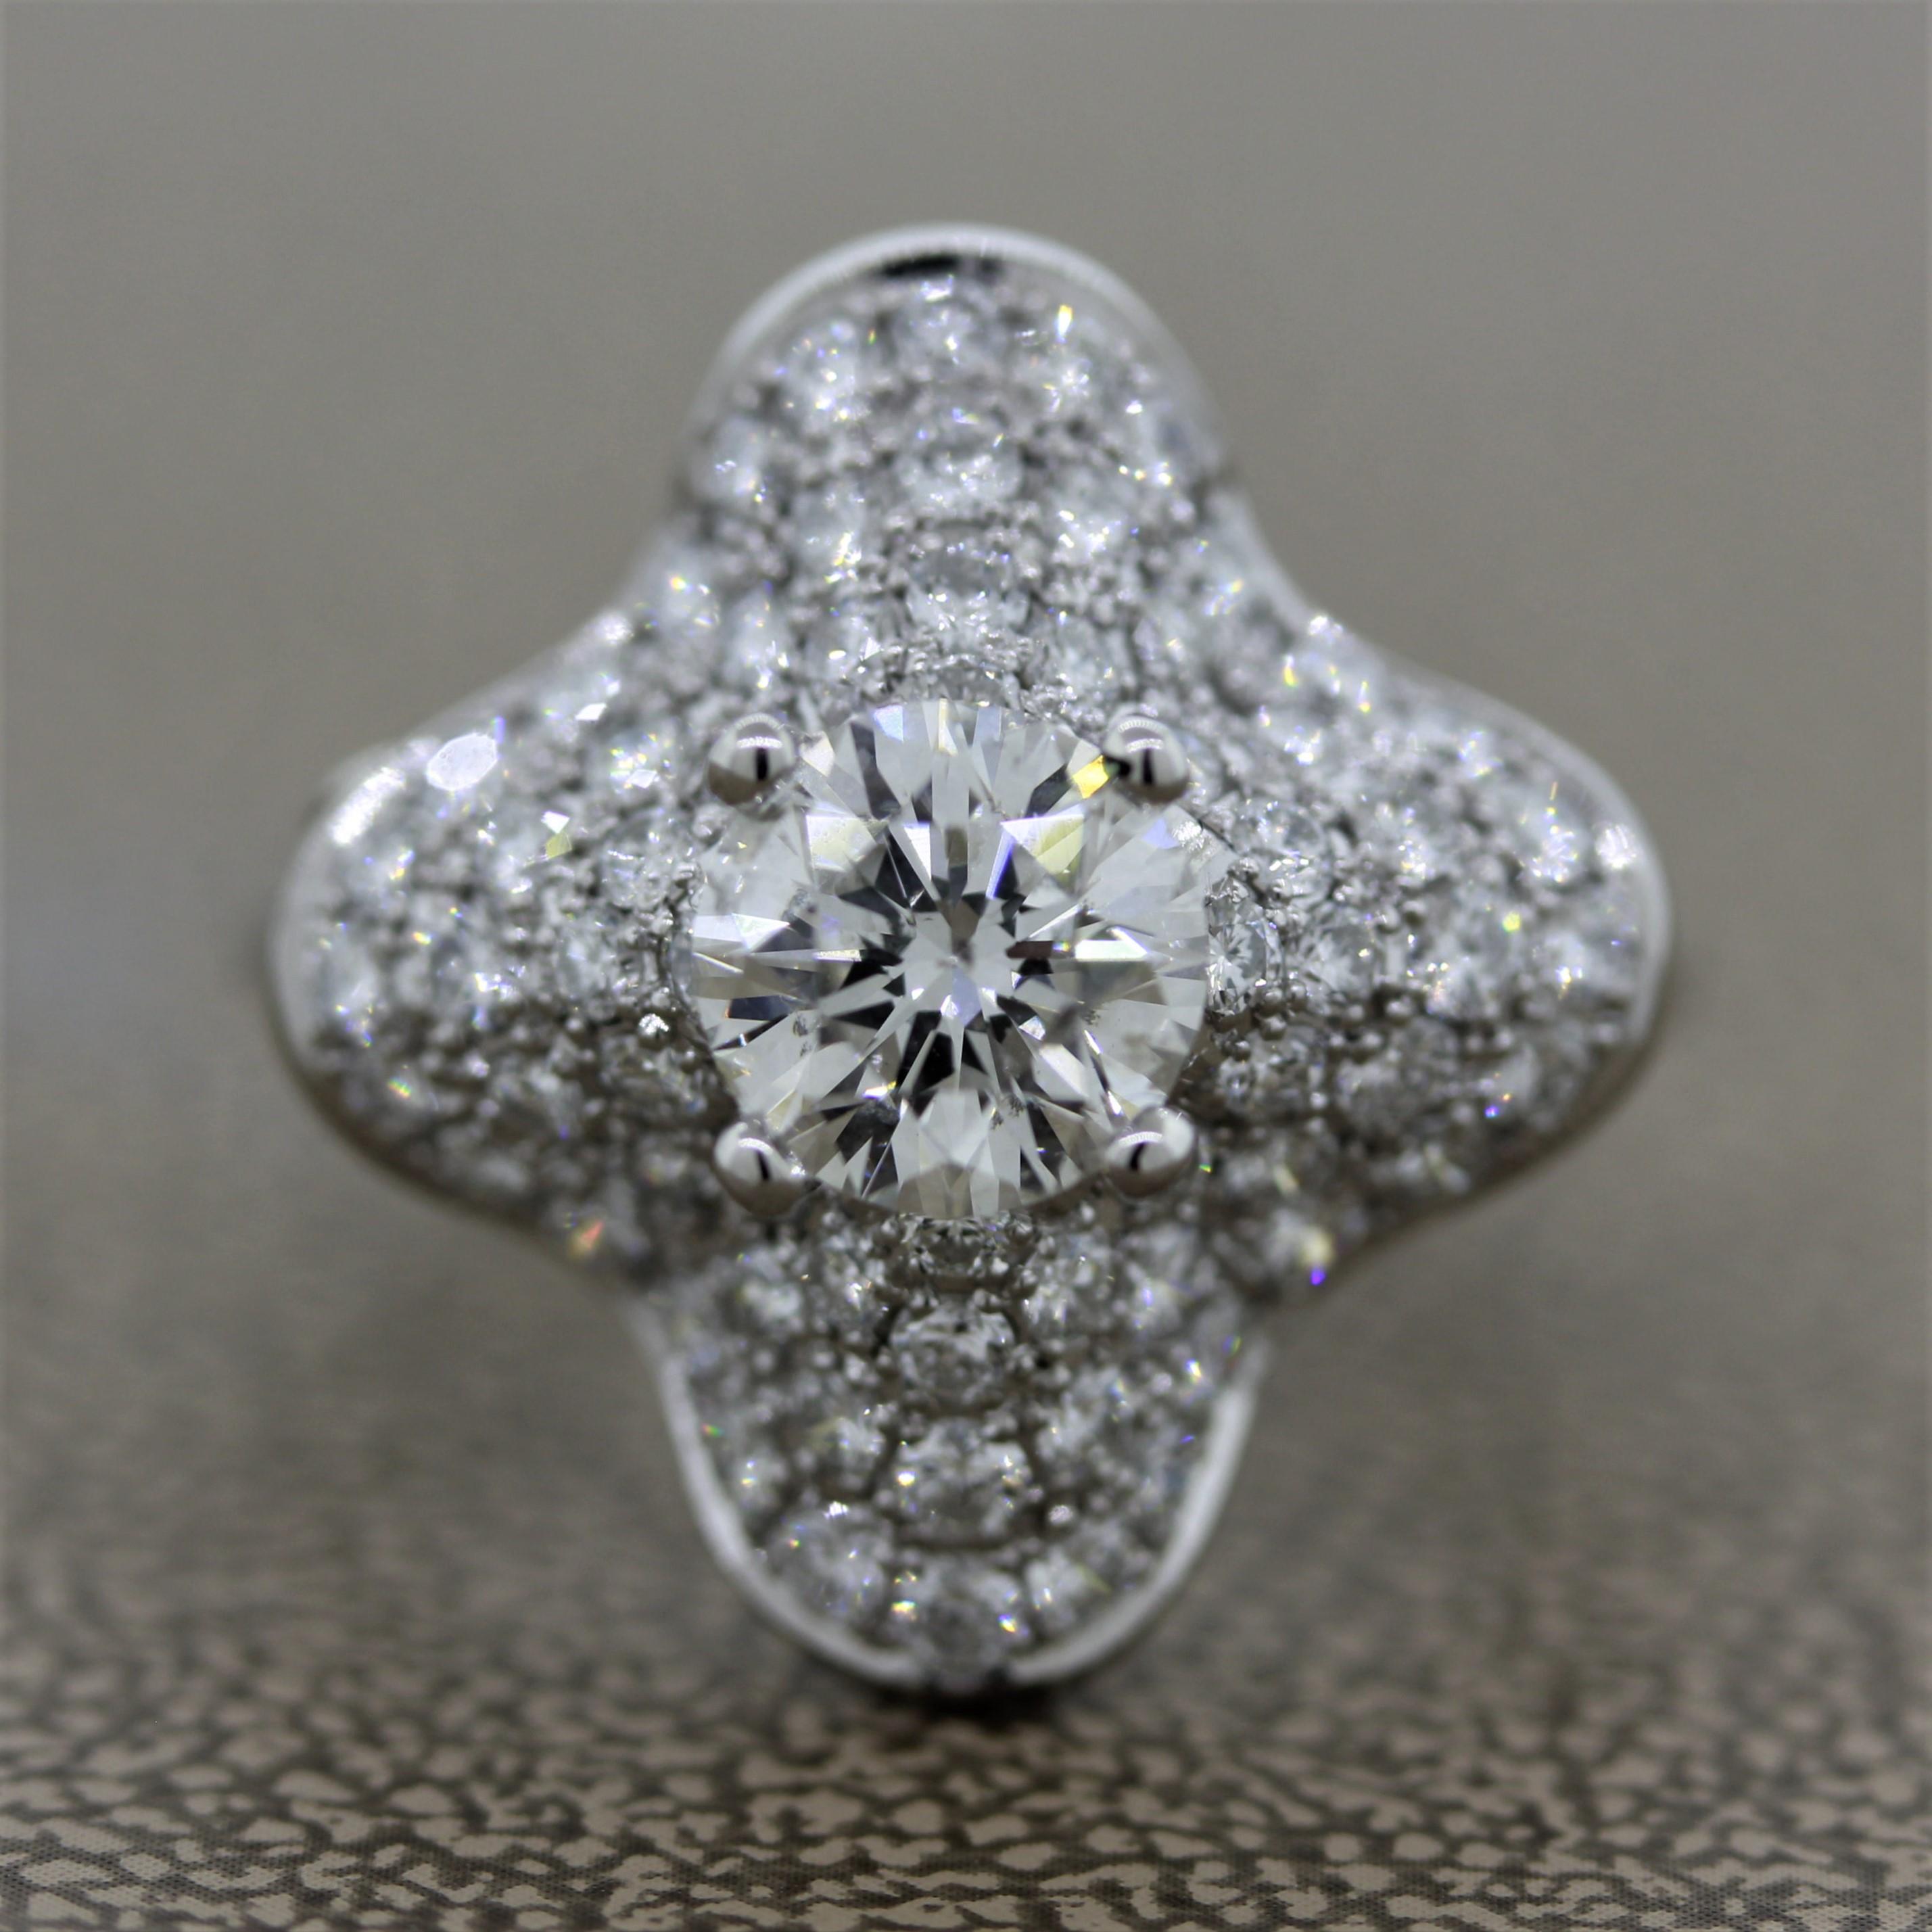 A sweet diamond ring featuring a 1.08 carat round brilliant cut diamond in the center. Surrounding the center diamond are an additional 0.86 carats of round brilliant cut diamonds which are pave set around this platinum clover ring. The center